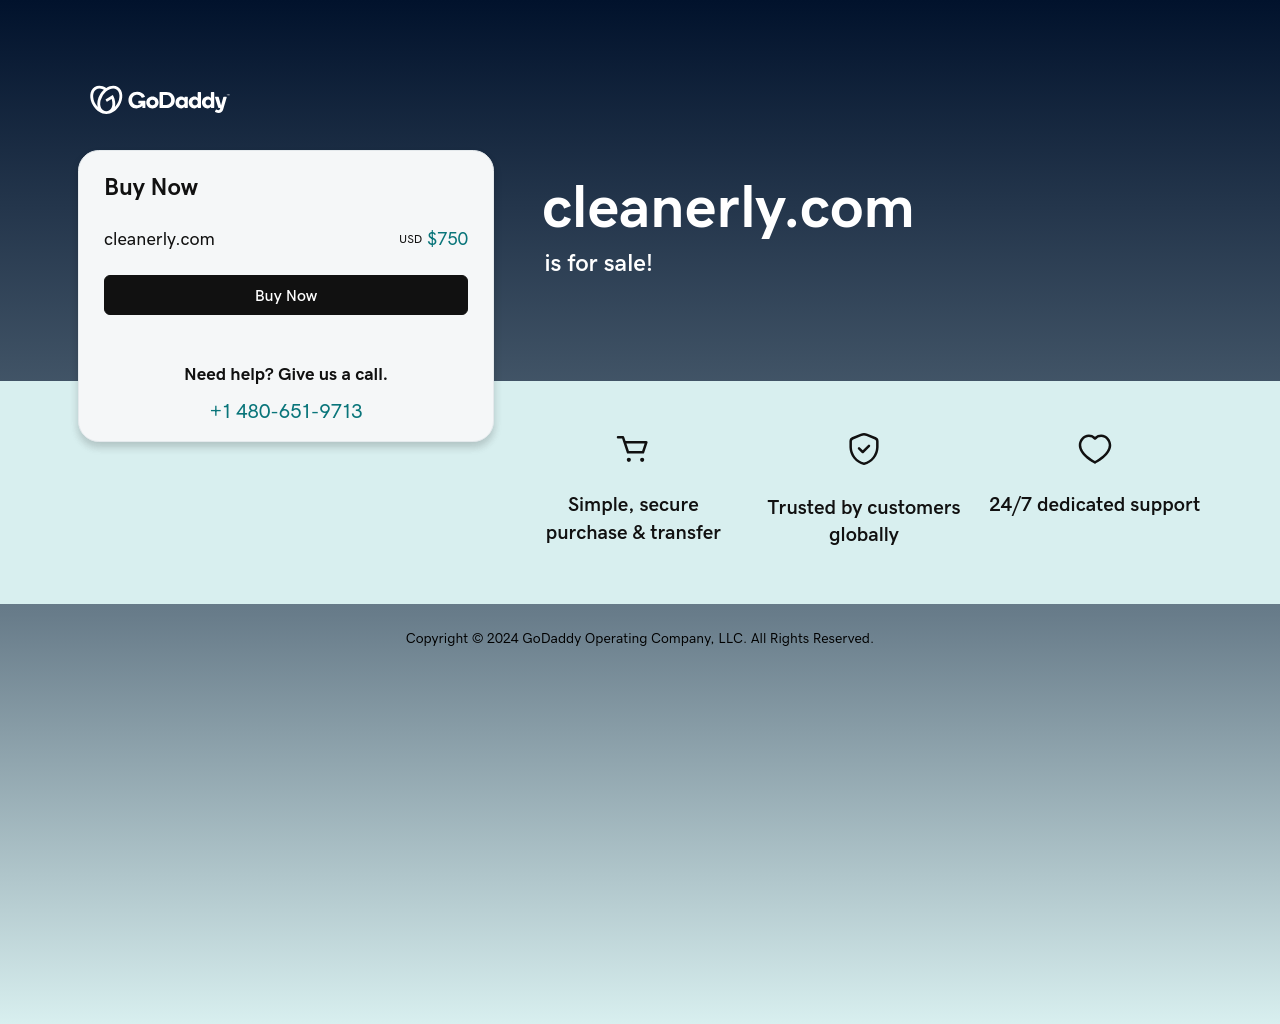 cleanerly.com